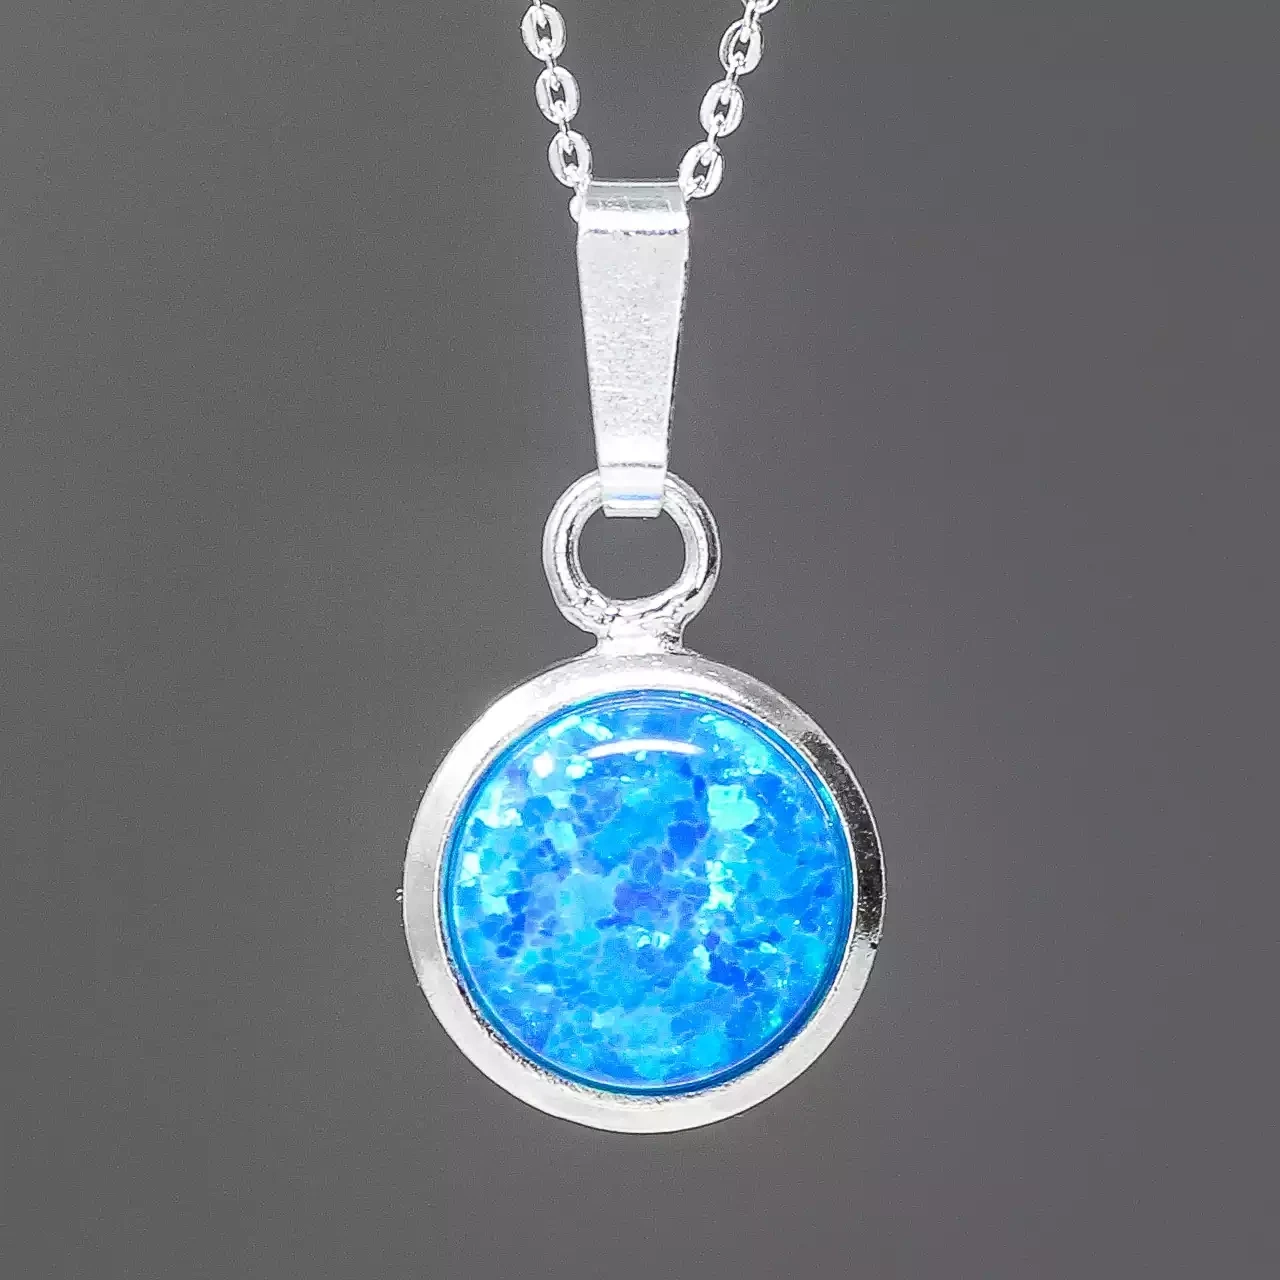 Dark Blue Opalite and Silver Round Pendant - 8mm by Lavan